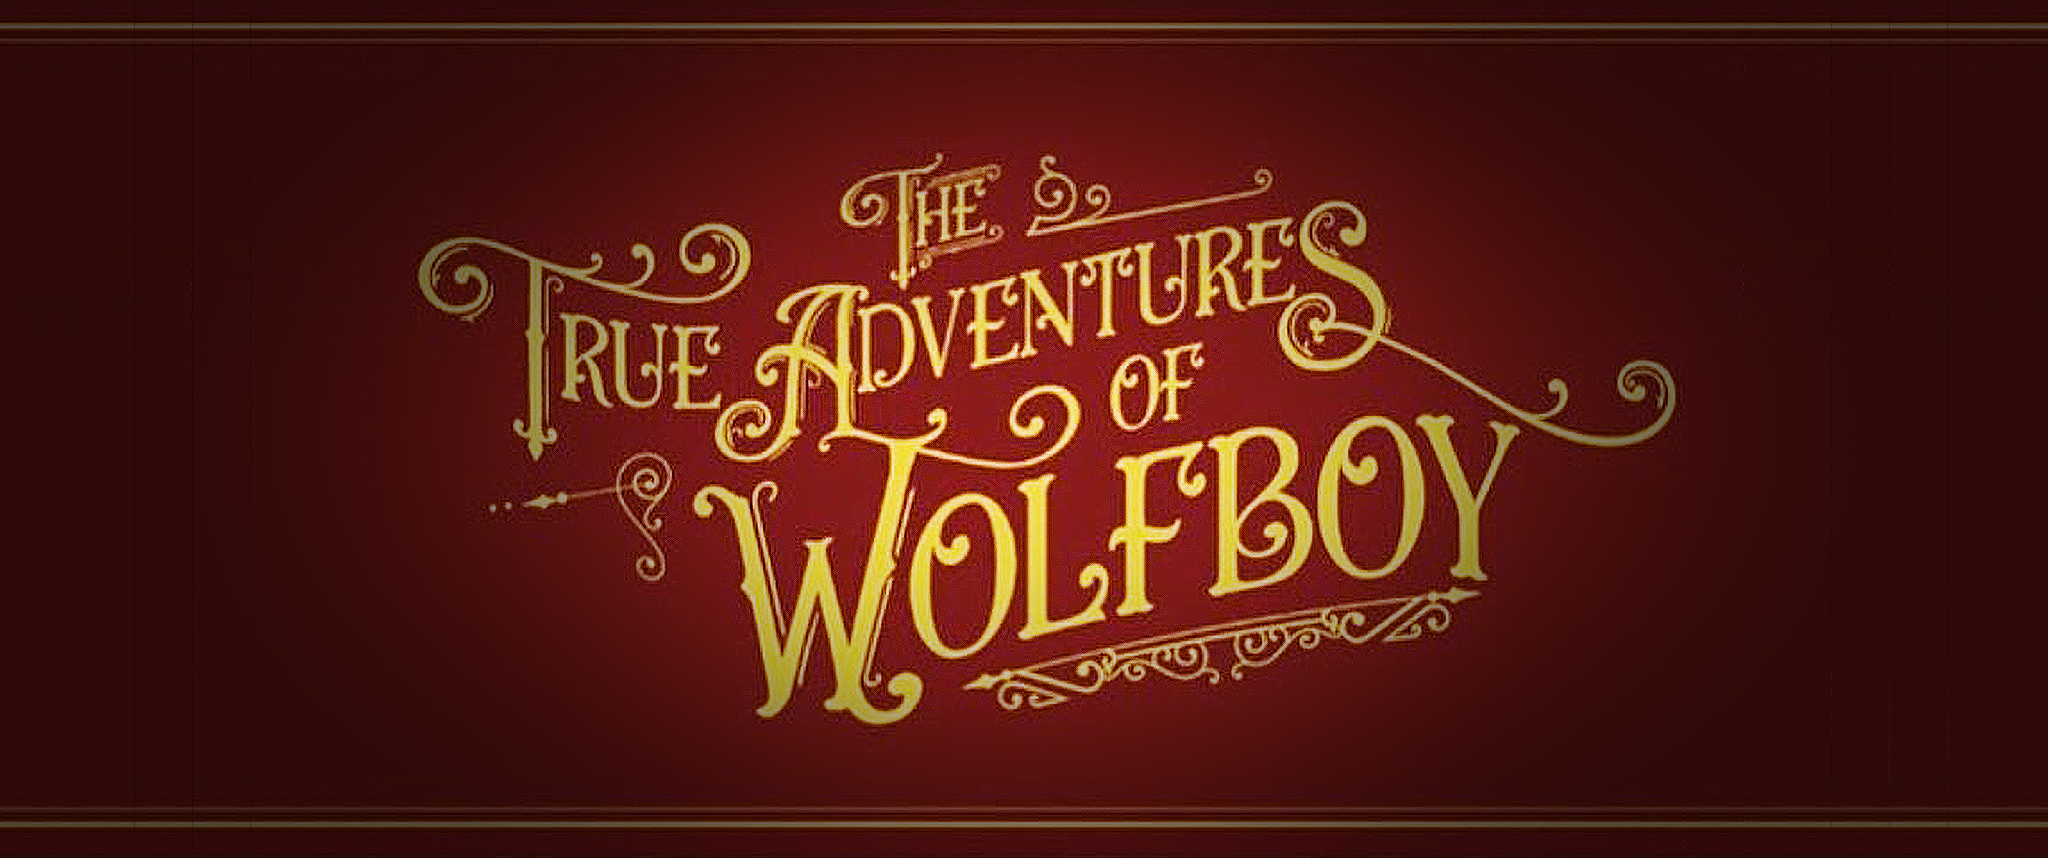 THE TRUE ADVENTURES OF WOLFBOY ºº FEATURE FILM